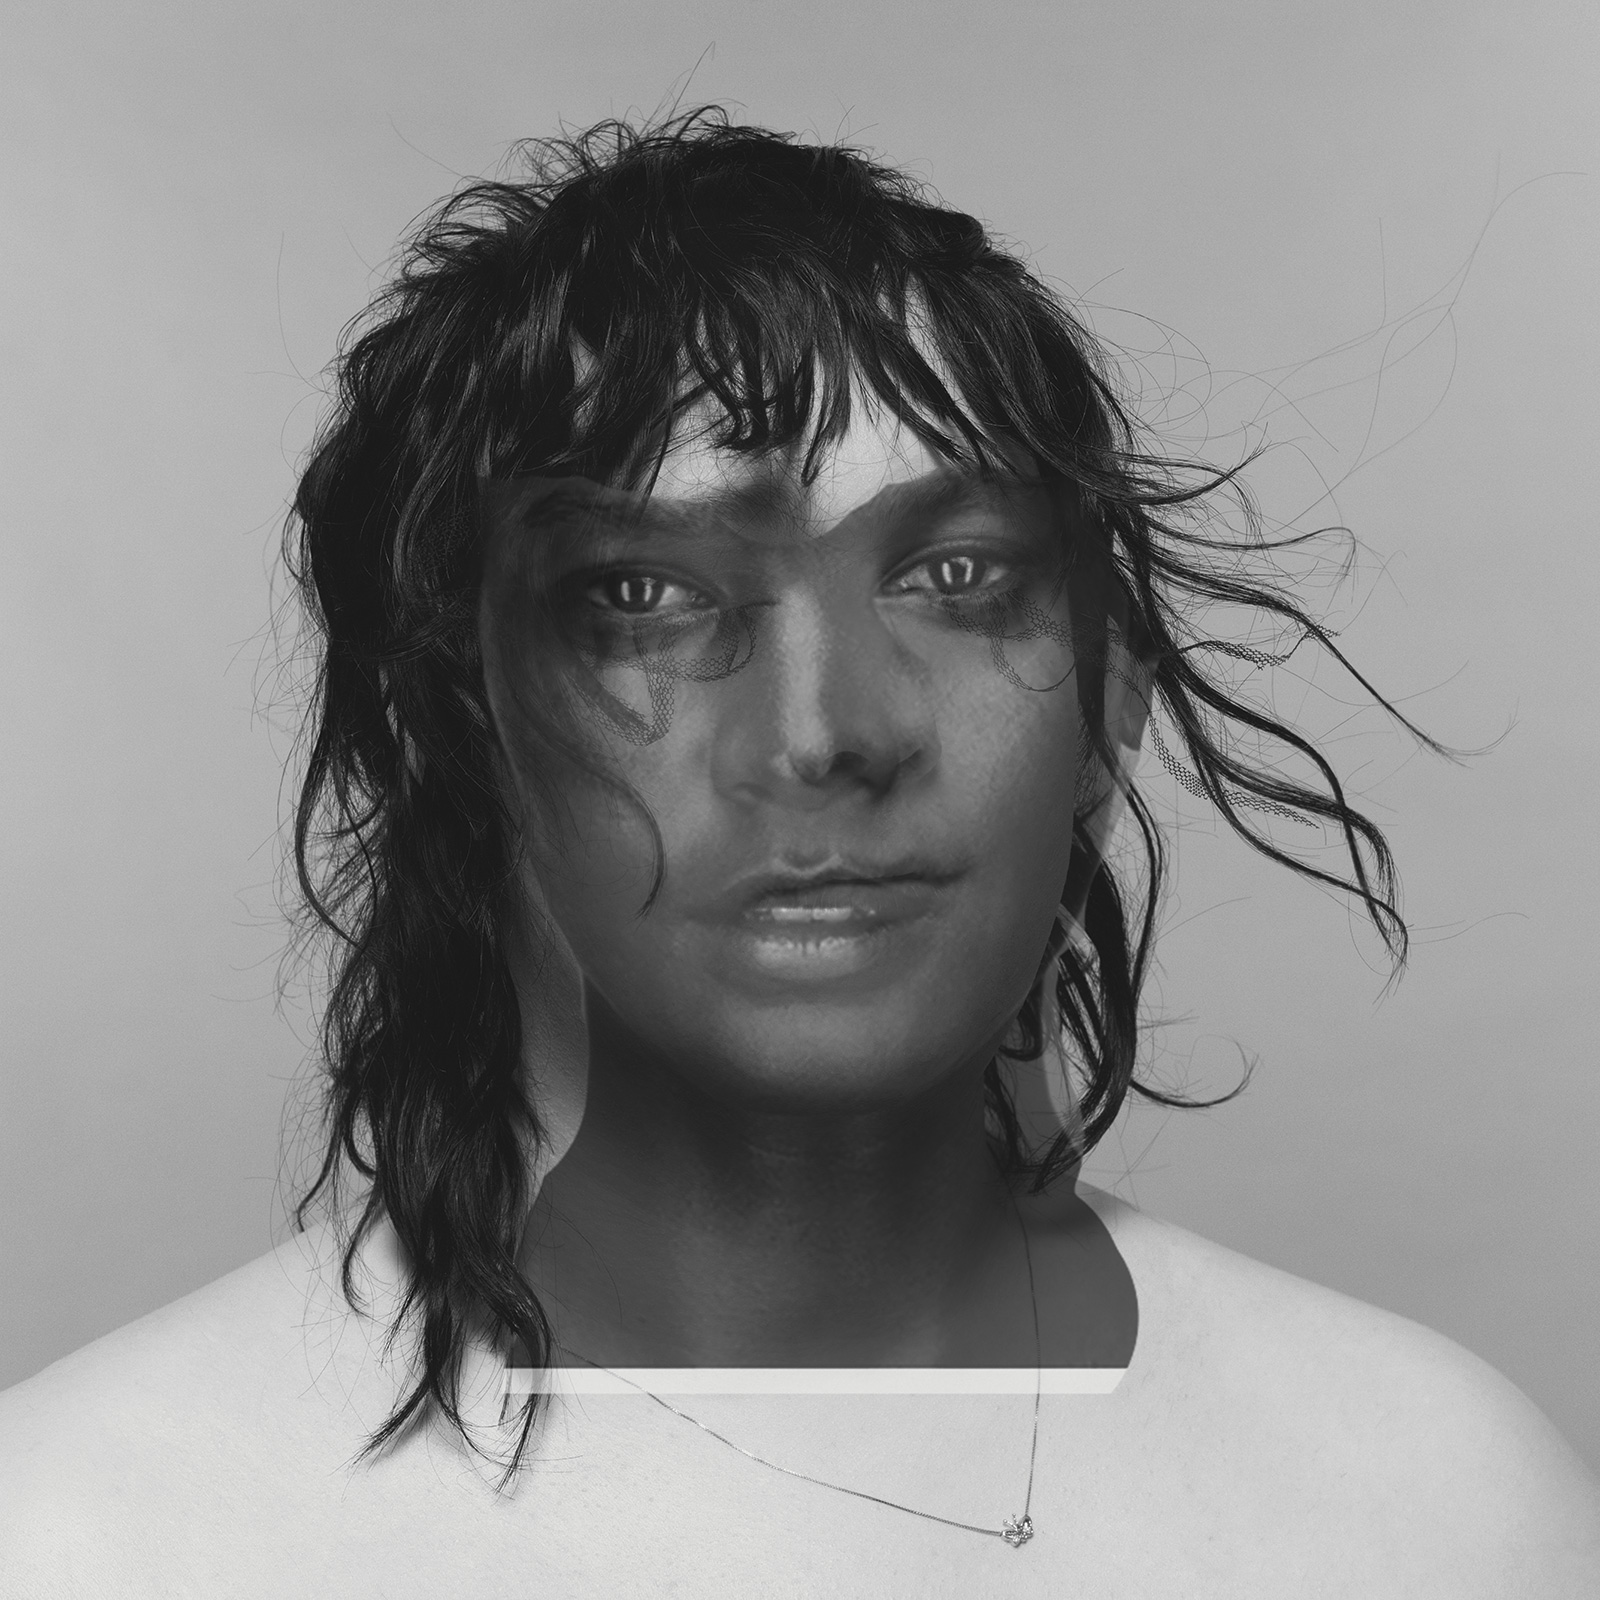 Coco Rosie and ANOHNI unveil collaborative protest song